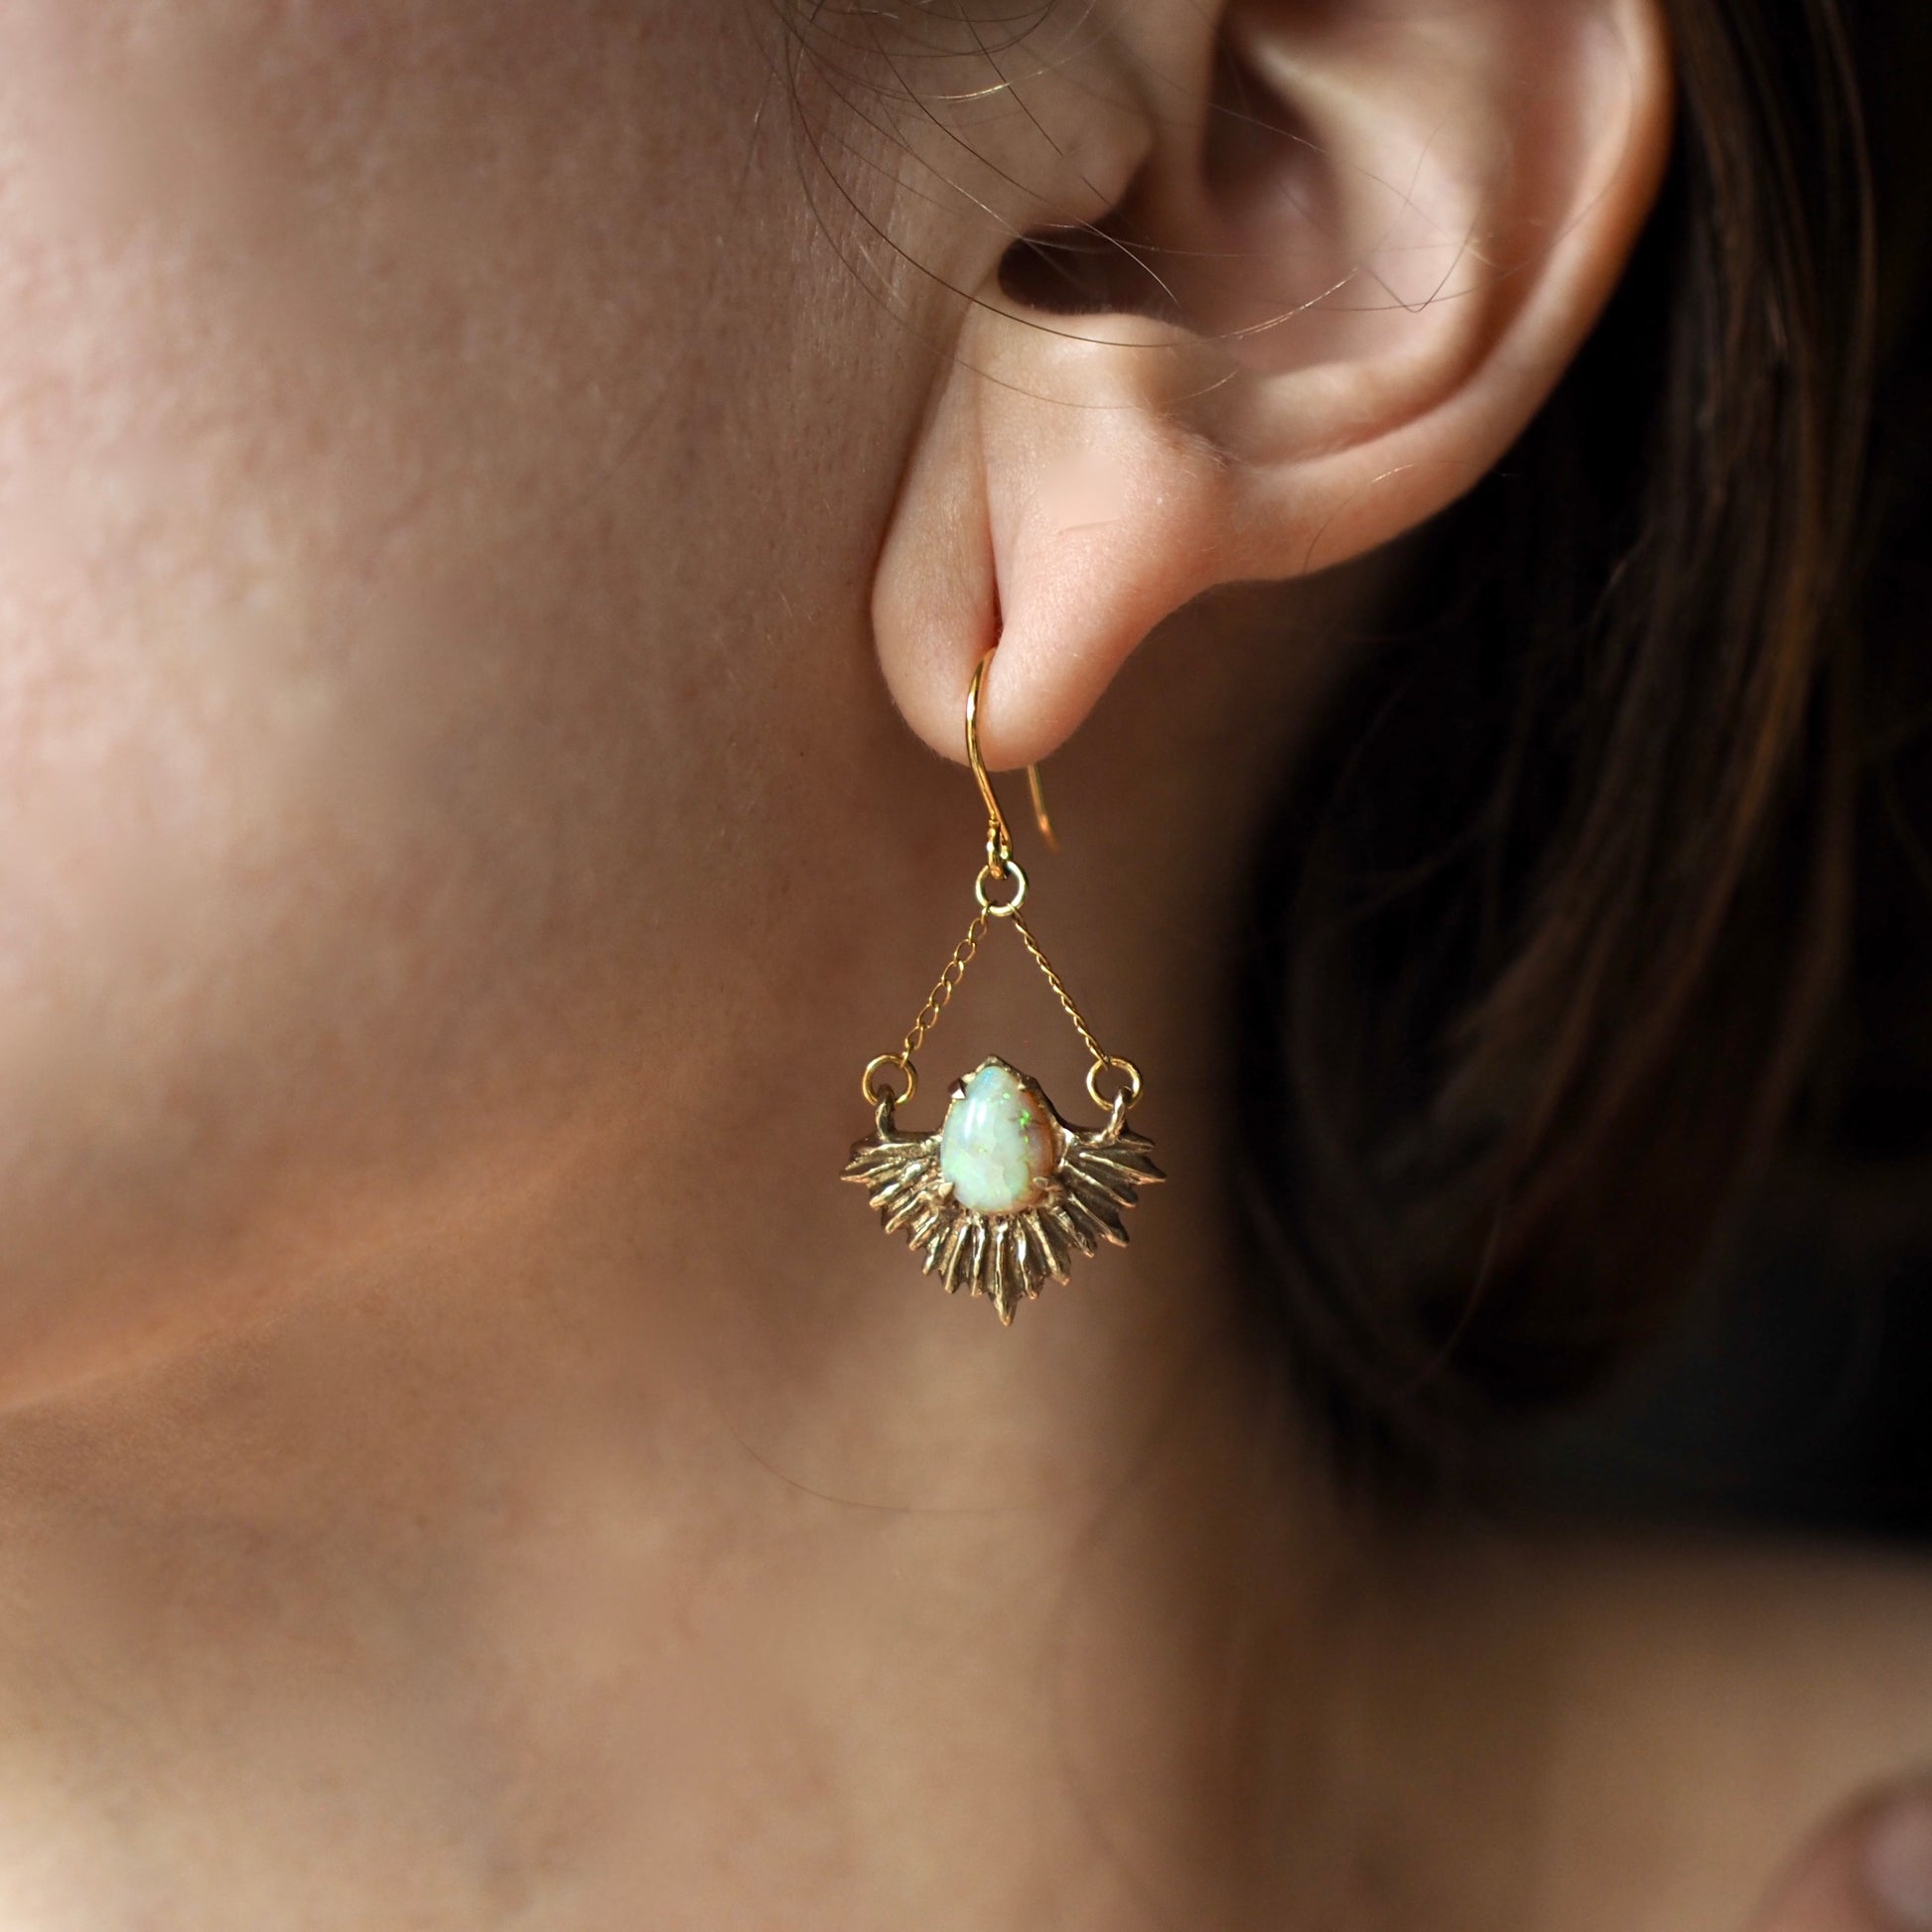 Gold Tone bronze earrings in the shape of beams of light set with teardrop shaped, lab grown opals on a model for scale